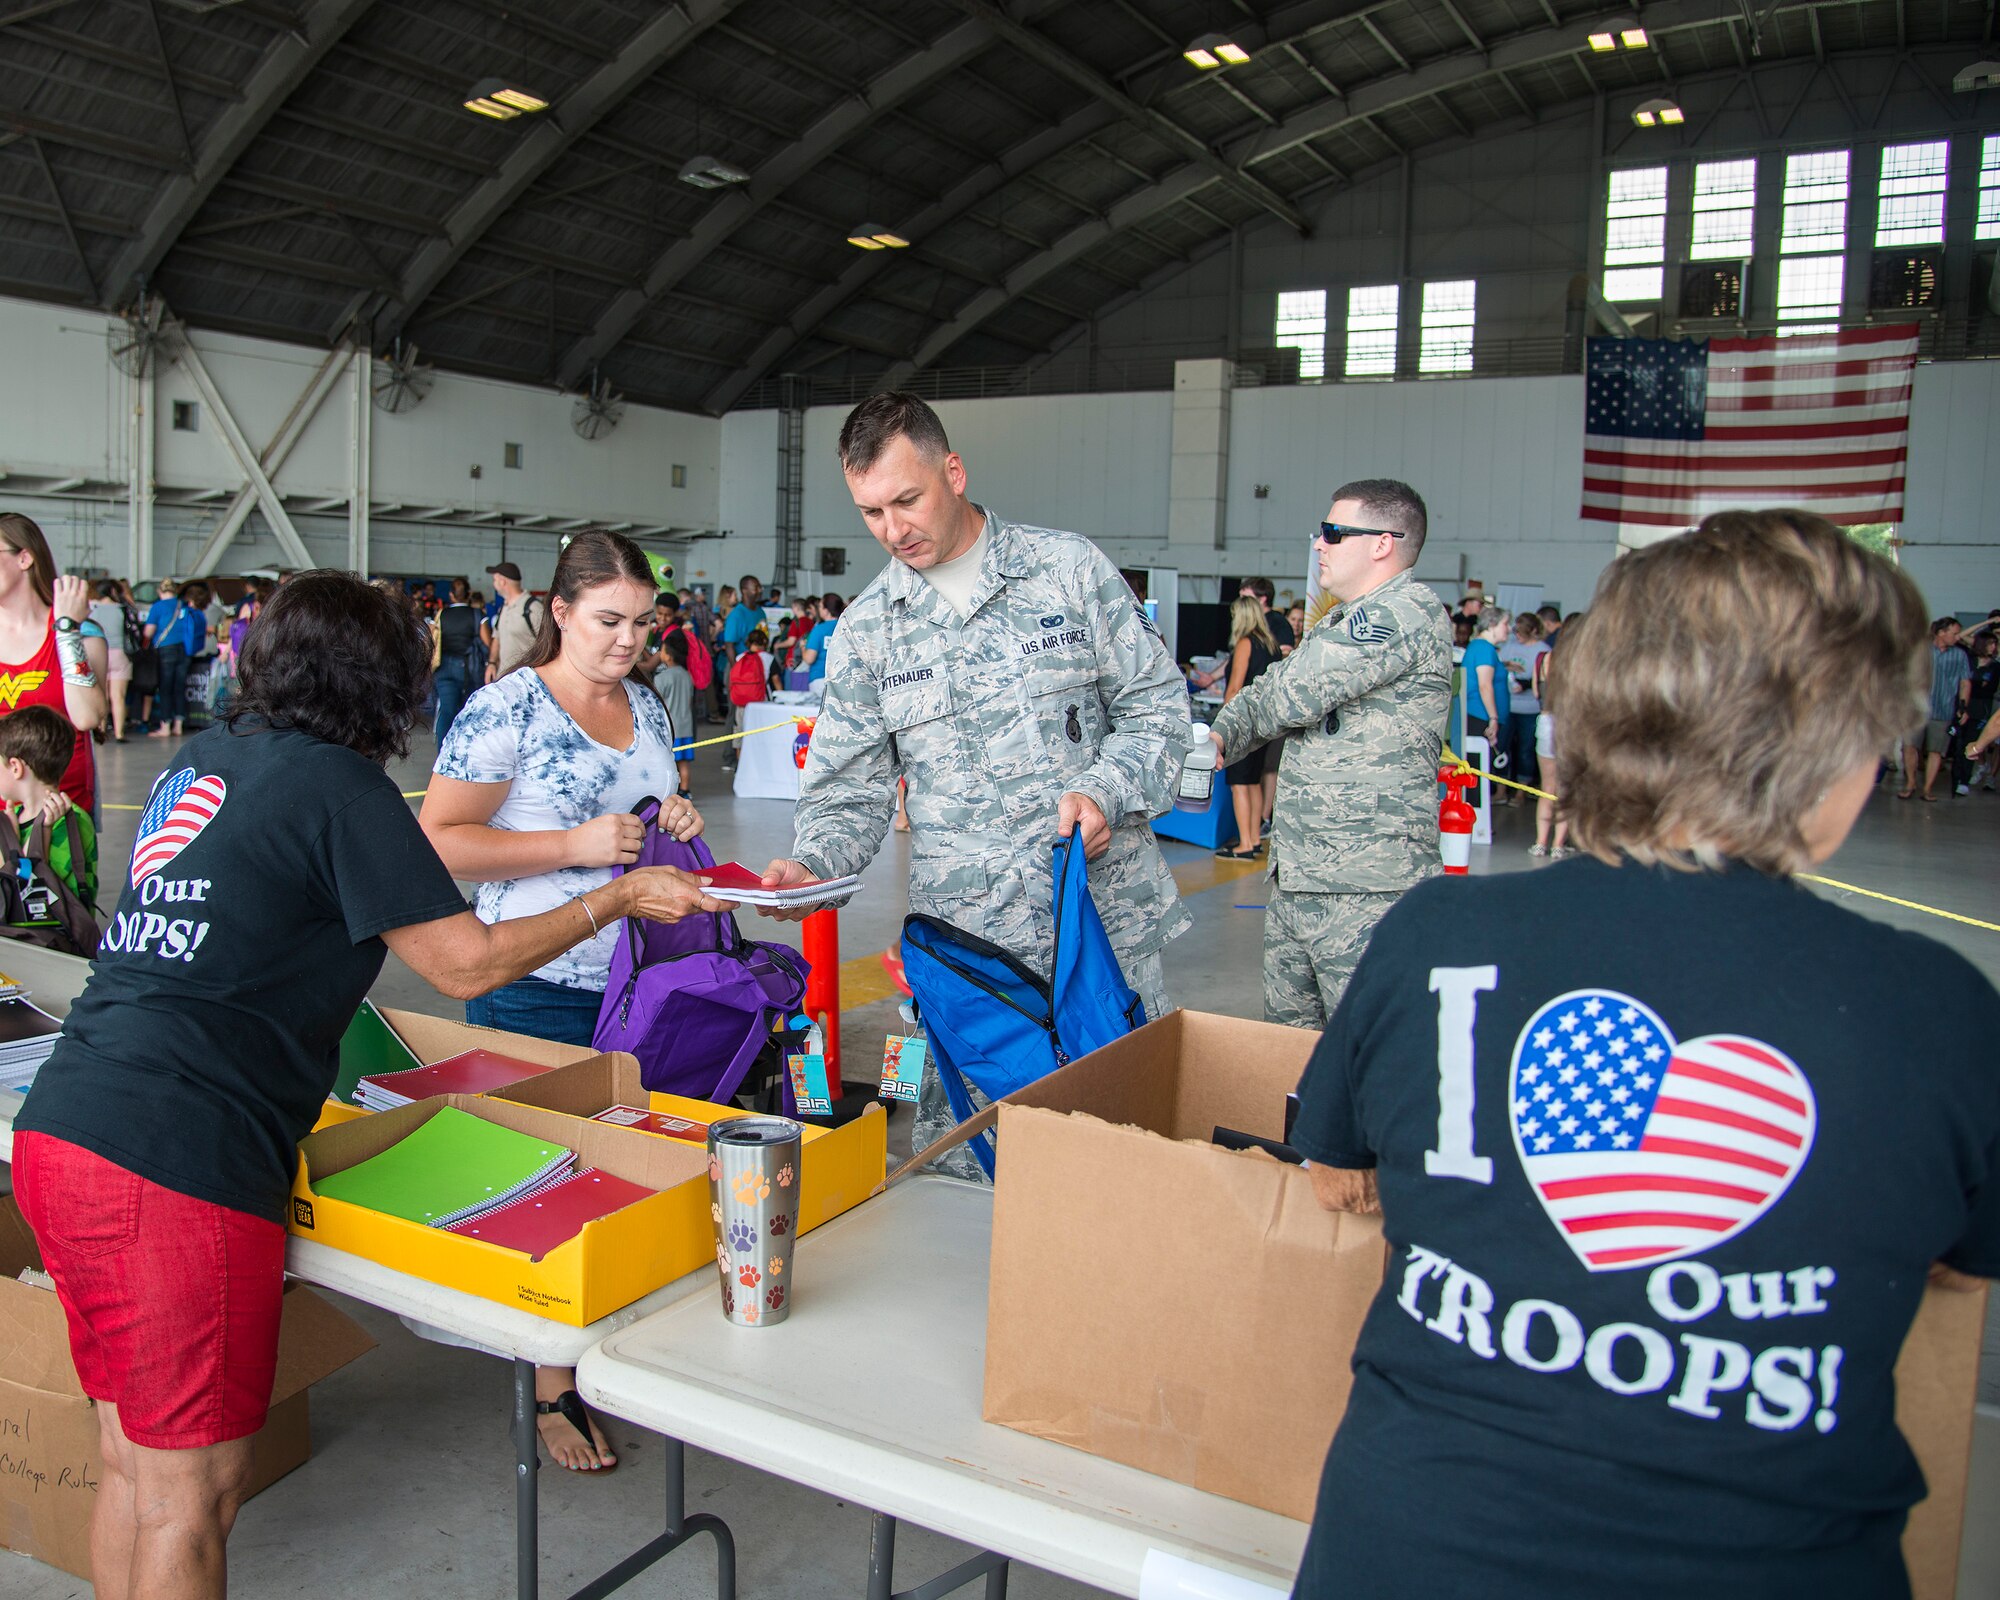 U.S. Air Force Staff Sgt. David Wittenauer, a 927th Security Forces Squadron defender, collects school supplies with his wife, Tara, at a Back to School Info Fair hosted by the 6th Force Support Squadron at MacDill Air Force Base, Fla., Aug. 3, 2019.